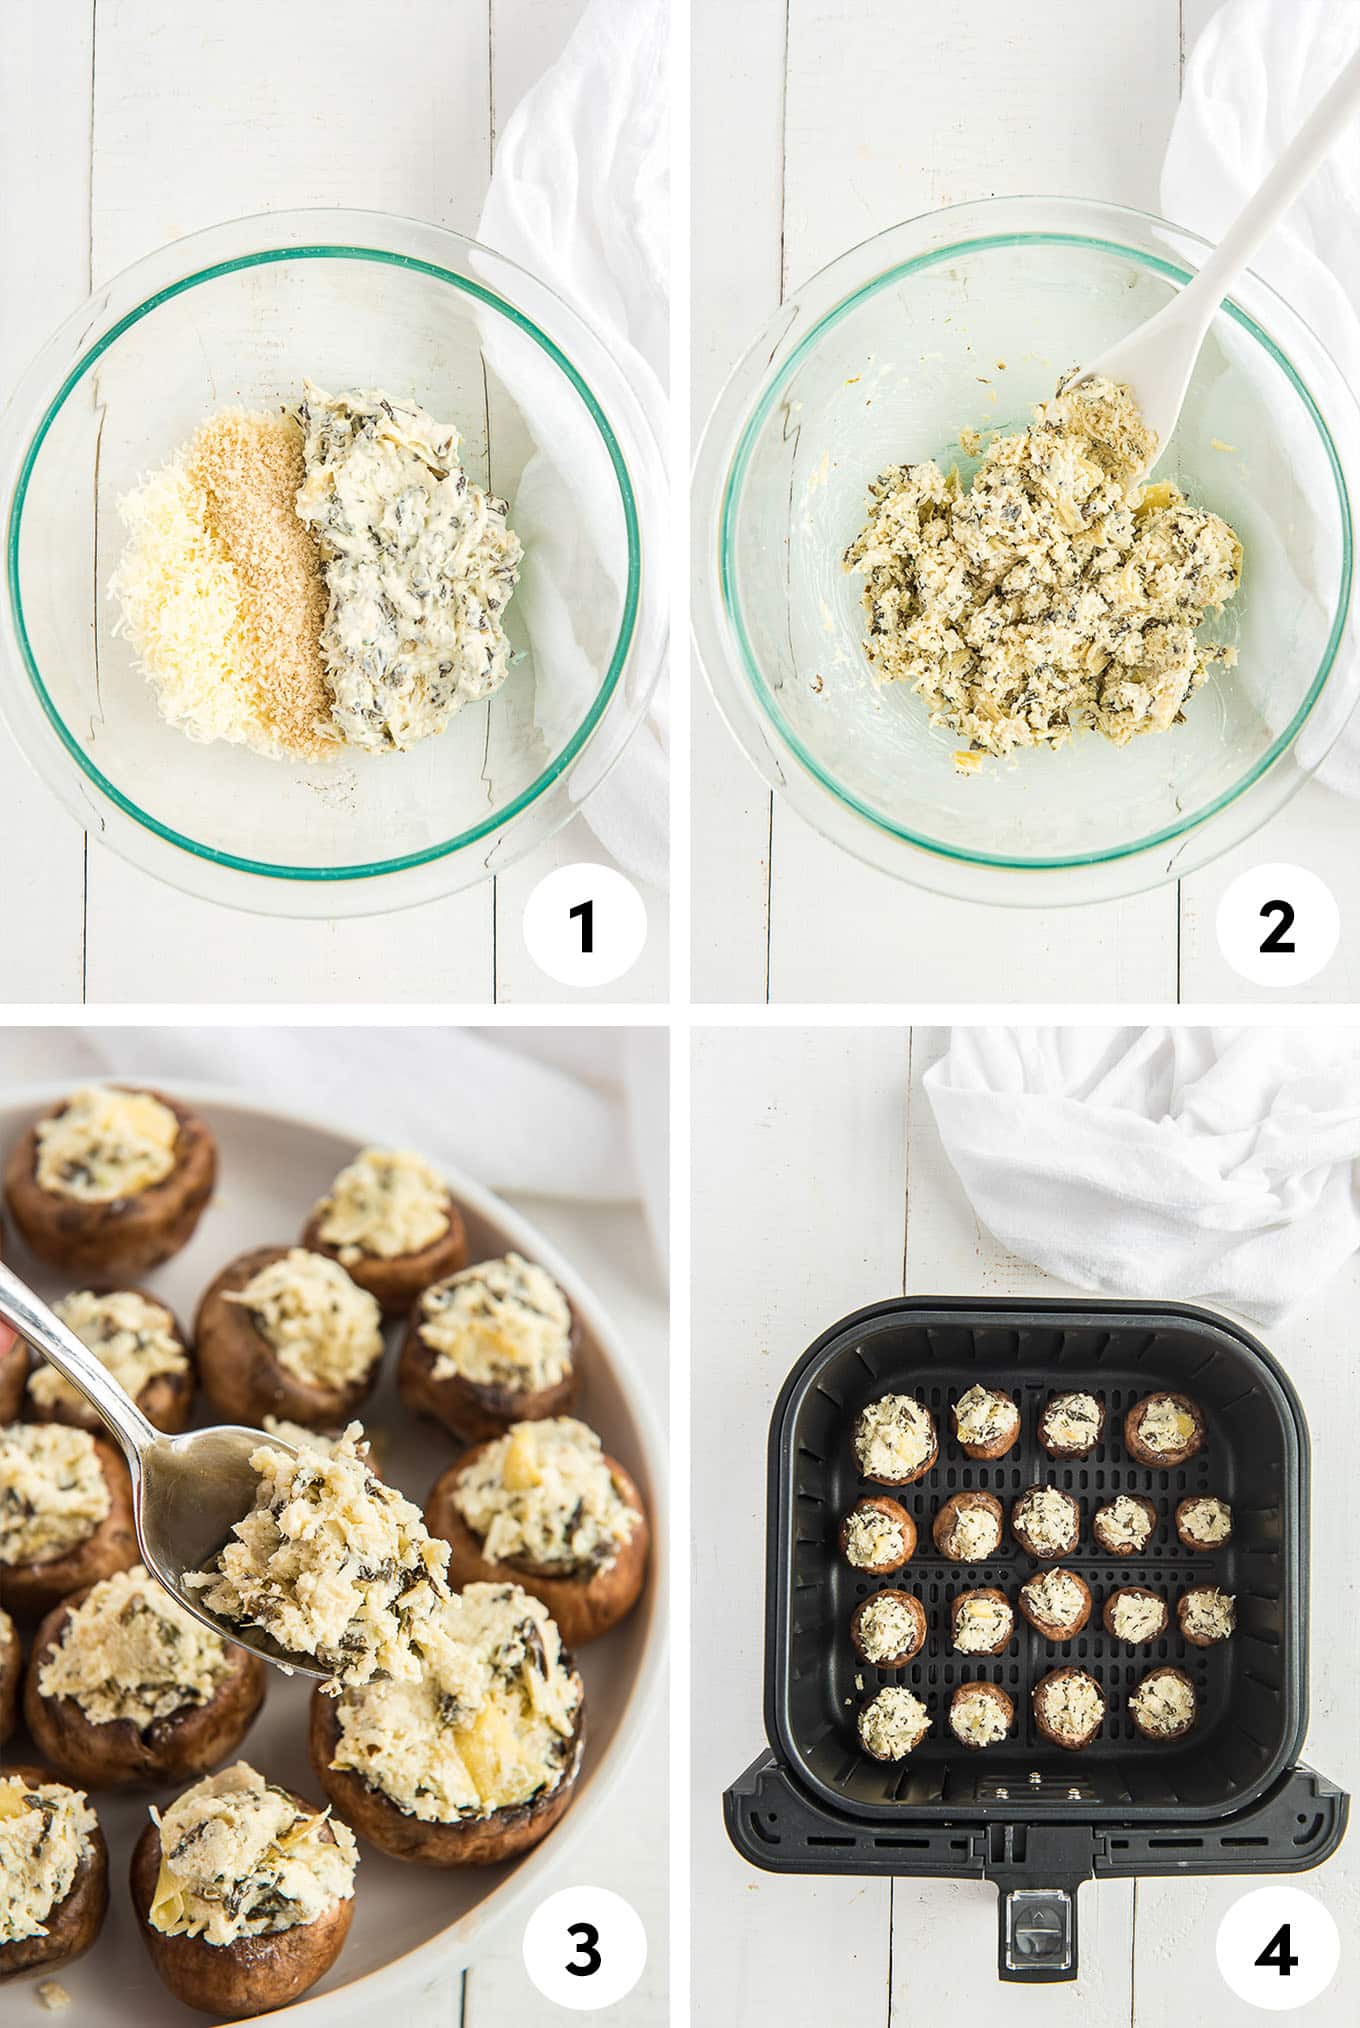 A collage showing the steps for making stuffed mushrooms in the air fryer including mixing the filling, stuffing the mushrooms, and in the air fryer basket.